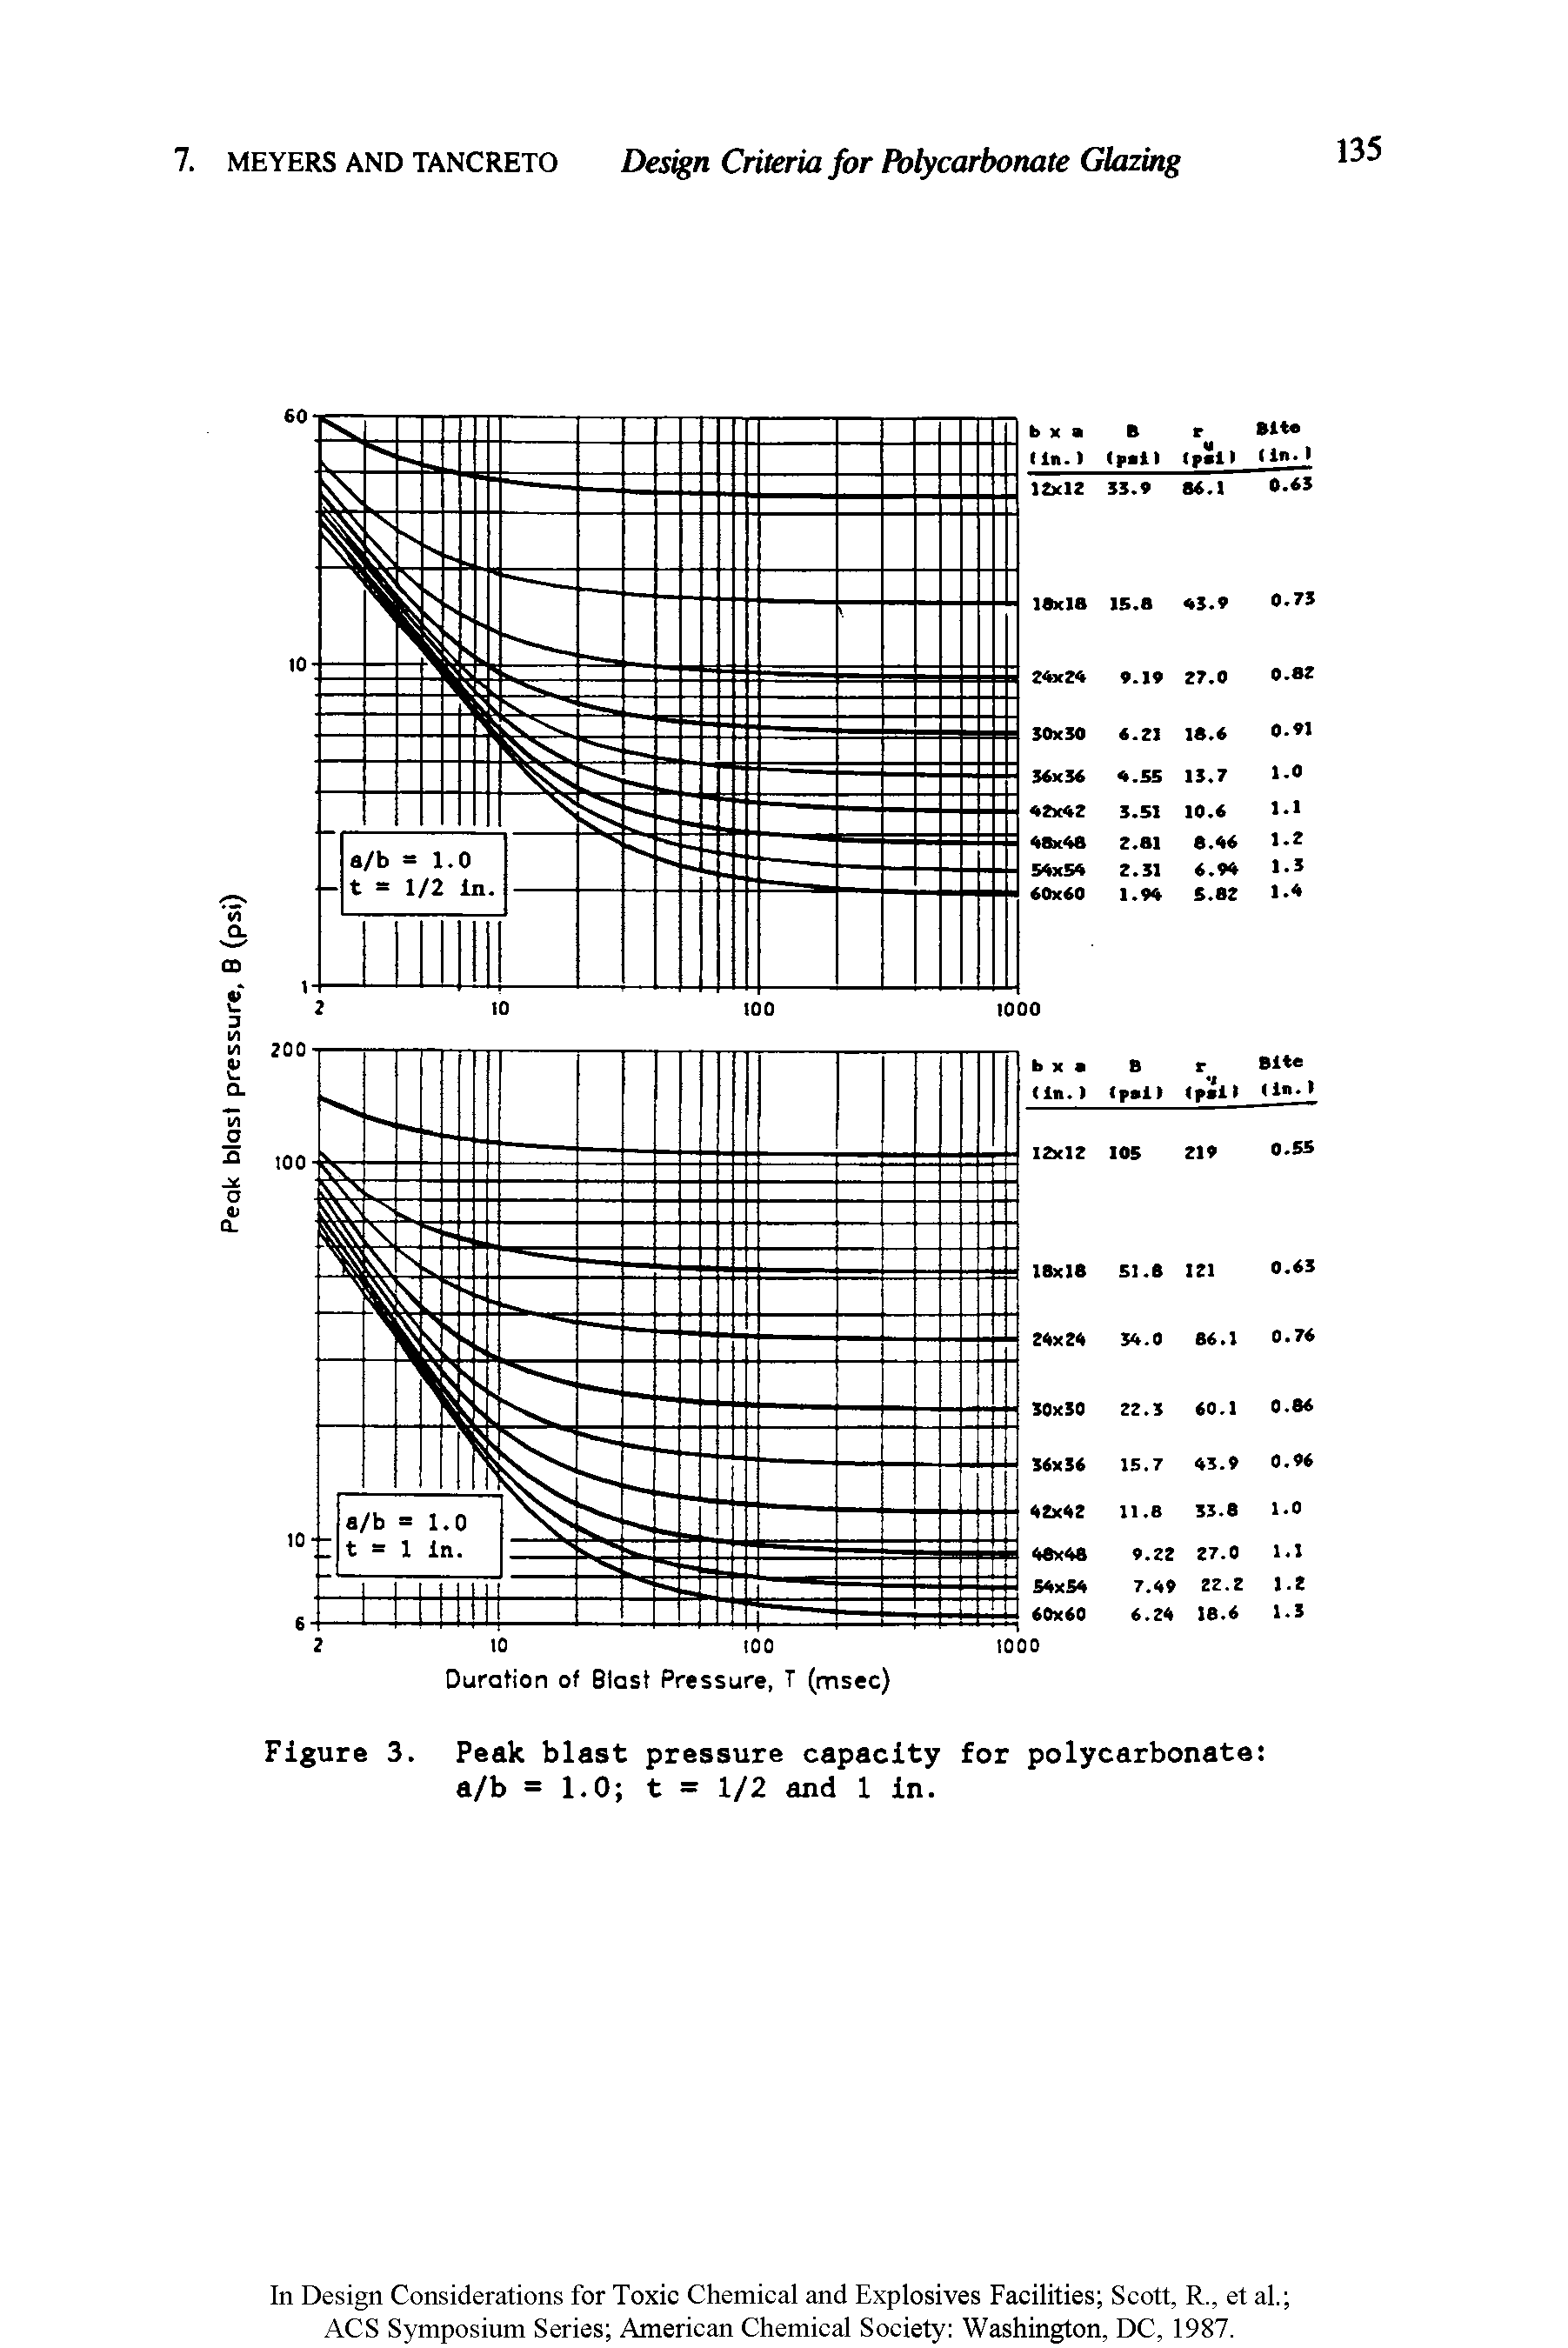 Figure 3. Peak blast pressure capacity for polycarbonate a/b =1.0 t = 1/2 and 1 in.